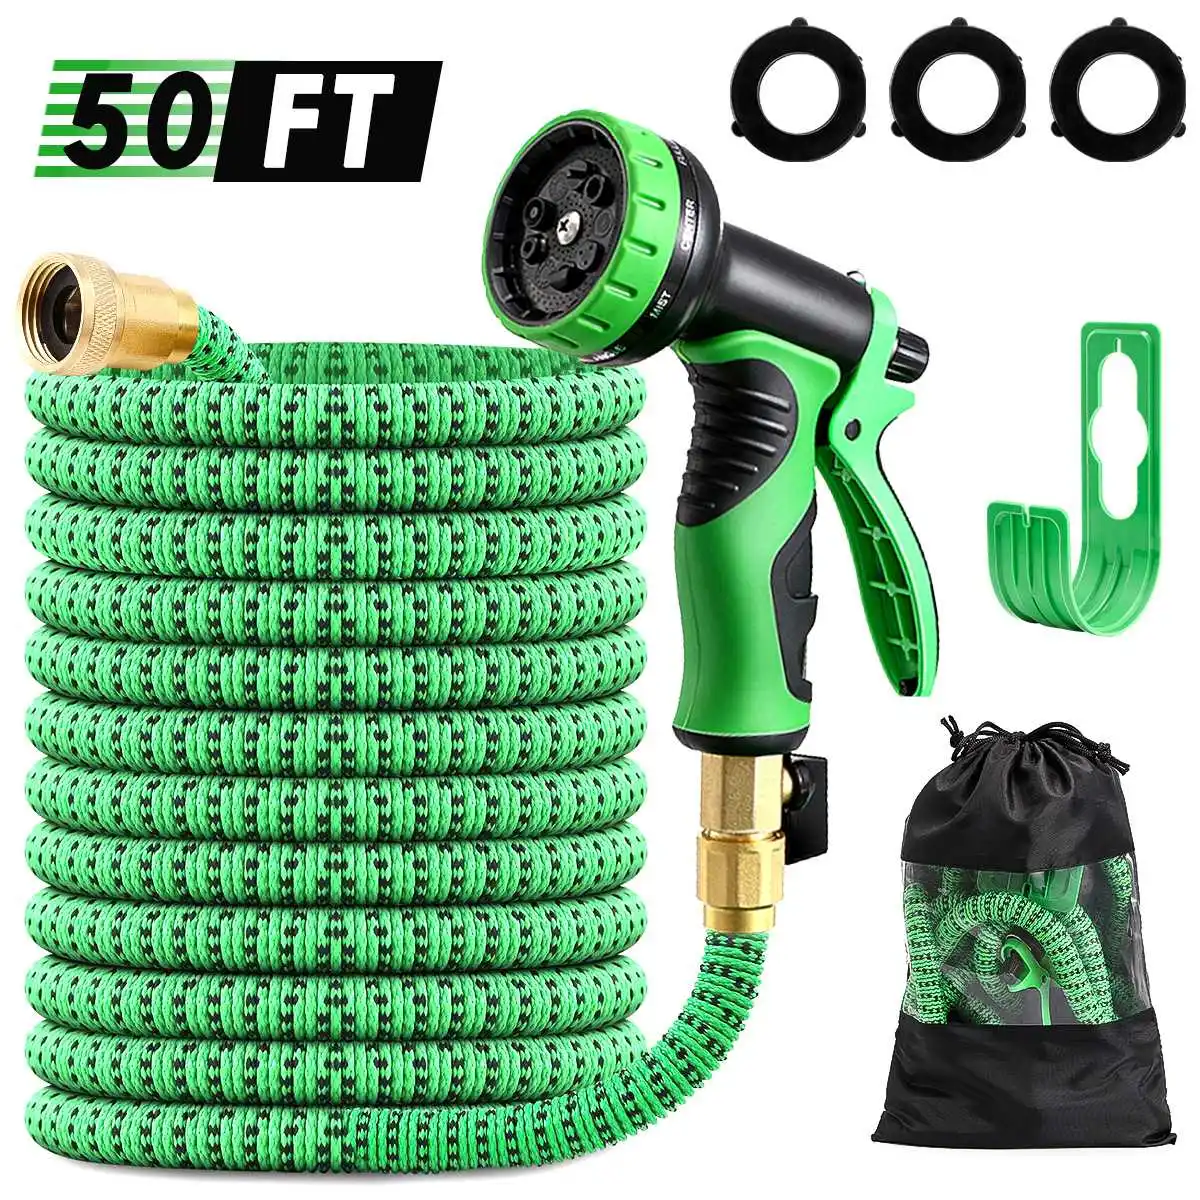 

50Ft Garden Hoses Pipe Upgraded Double Latex Retractable Pipe High Pressure Car Wash Hose With Spray Gun Garden Watering